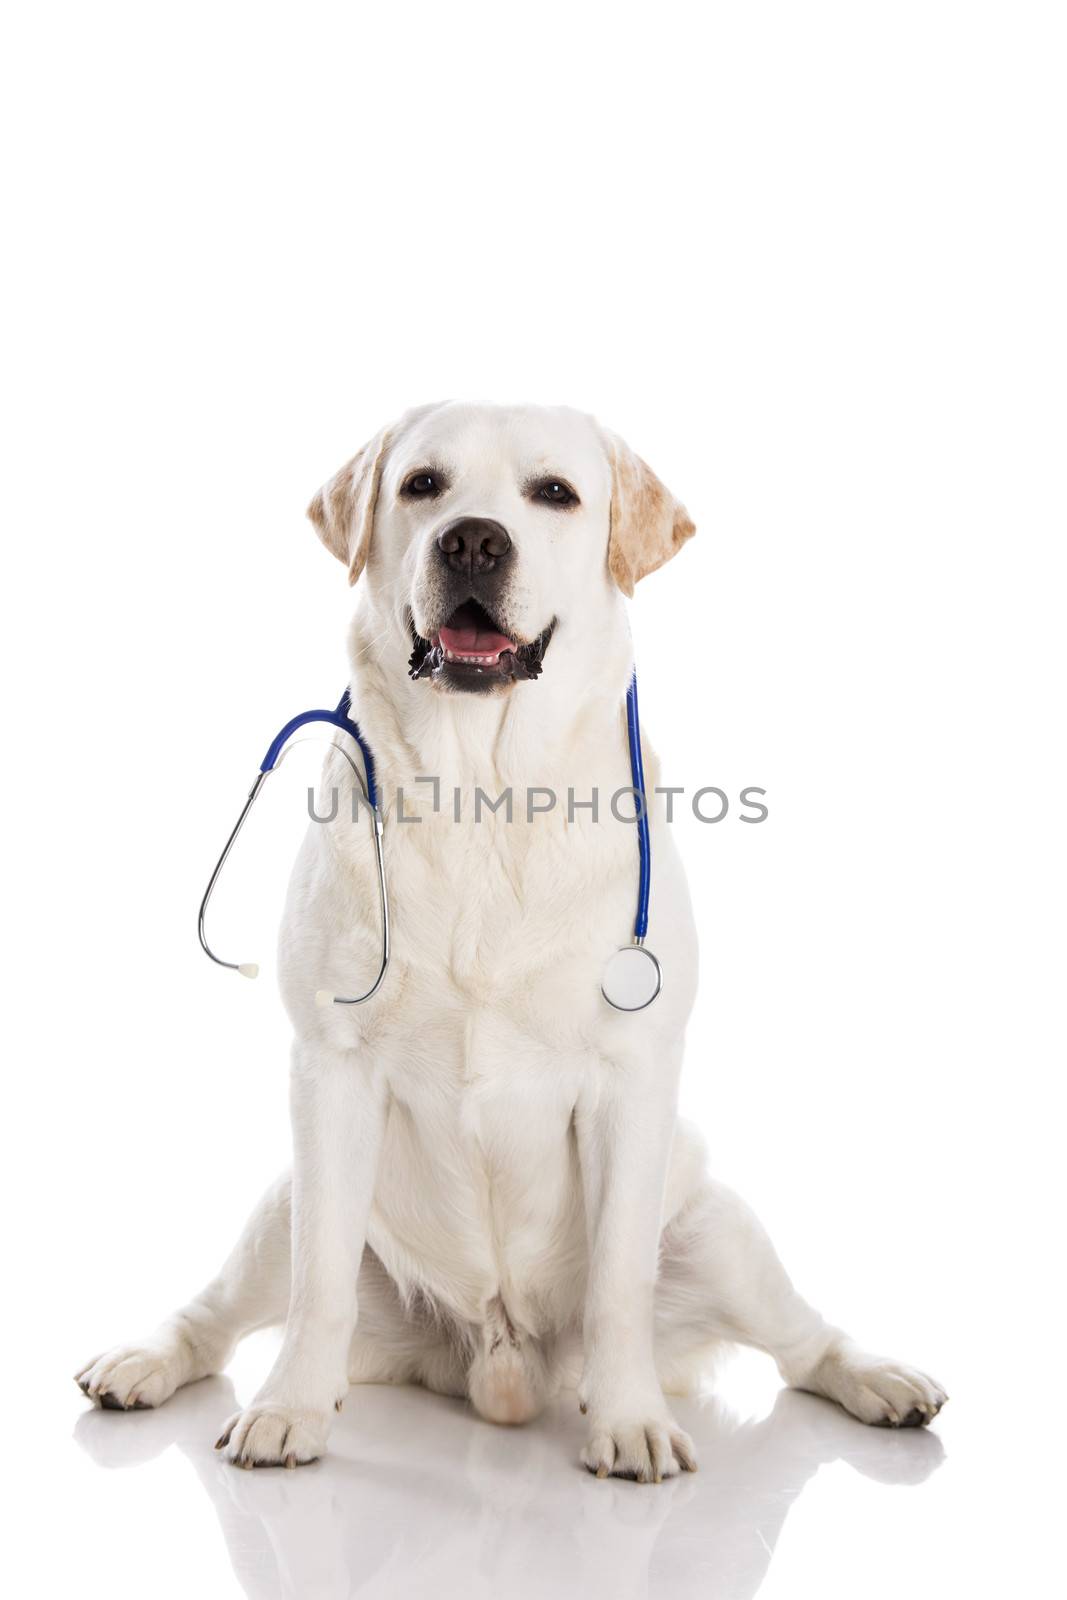 Beautiful labrador retriever with a stethoscope on his neck, isolated on white